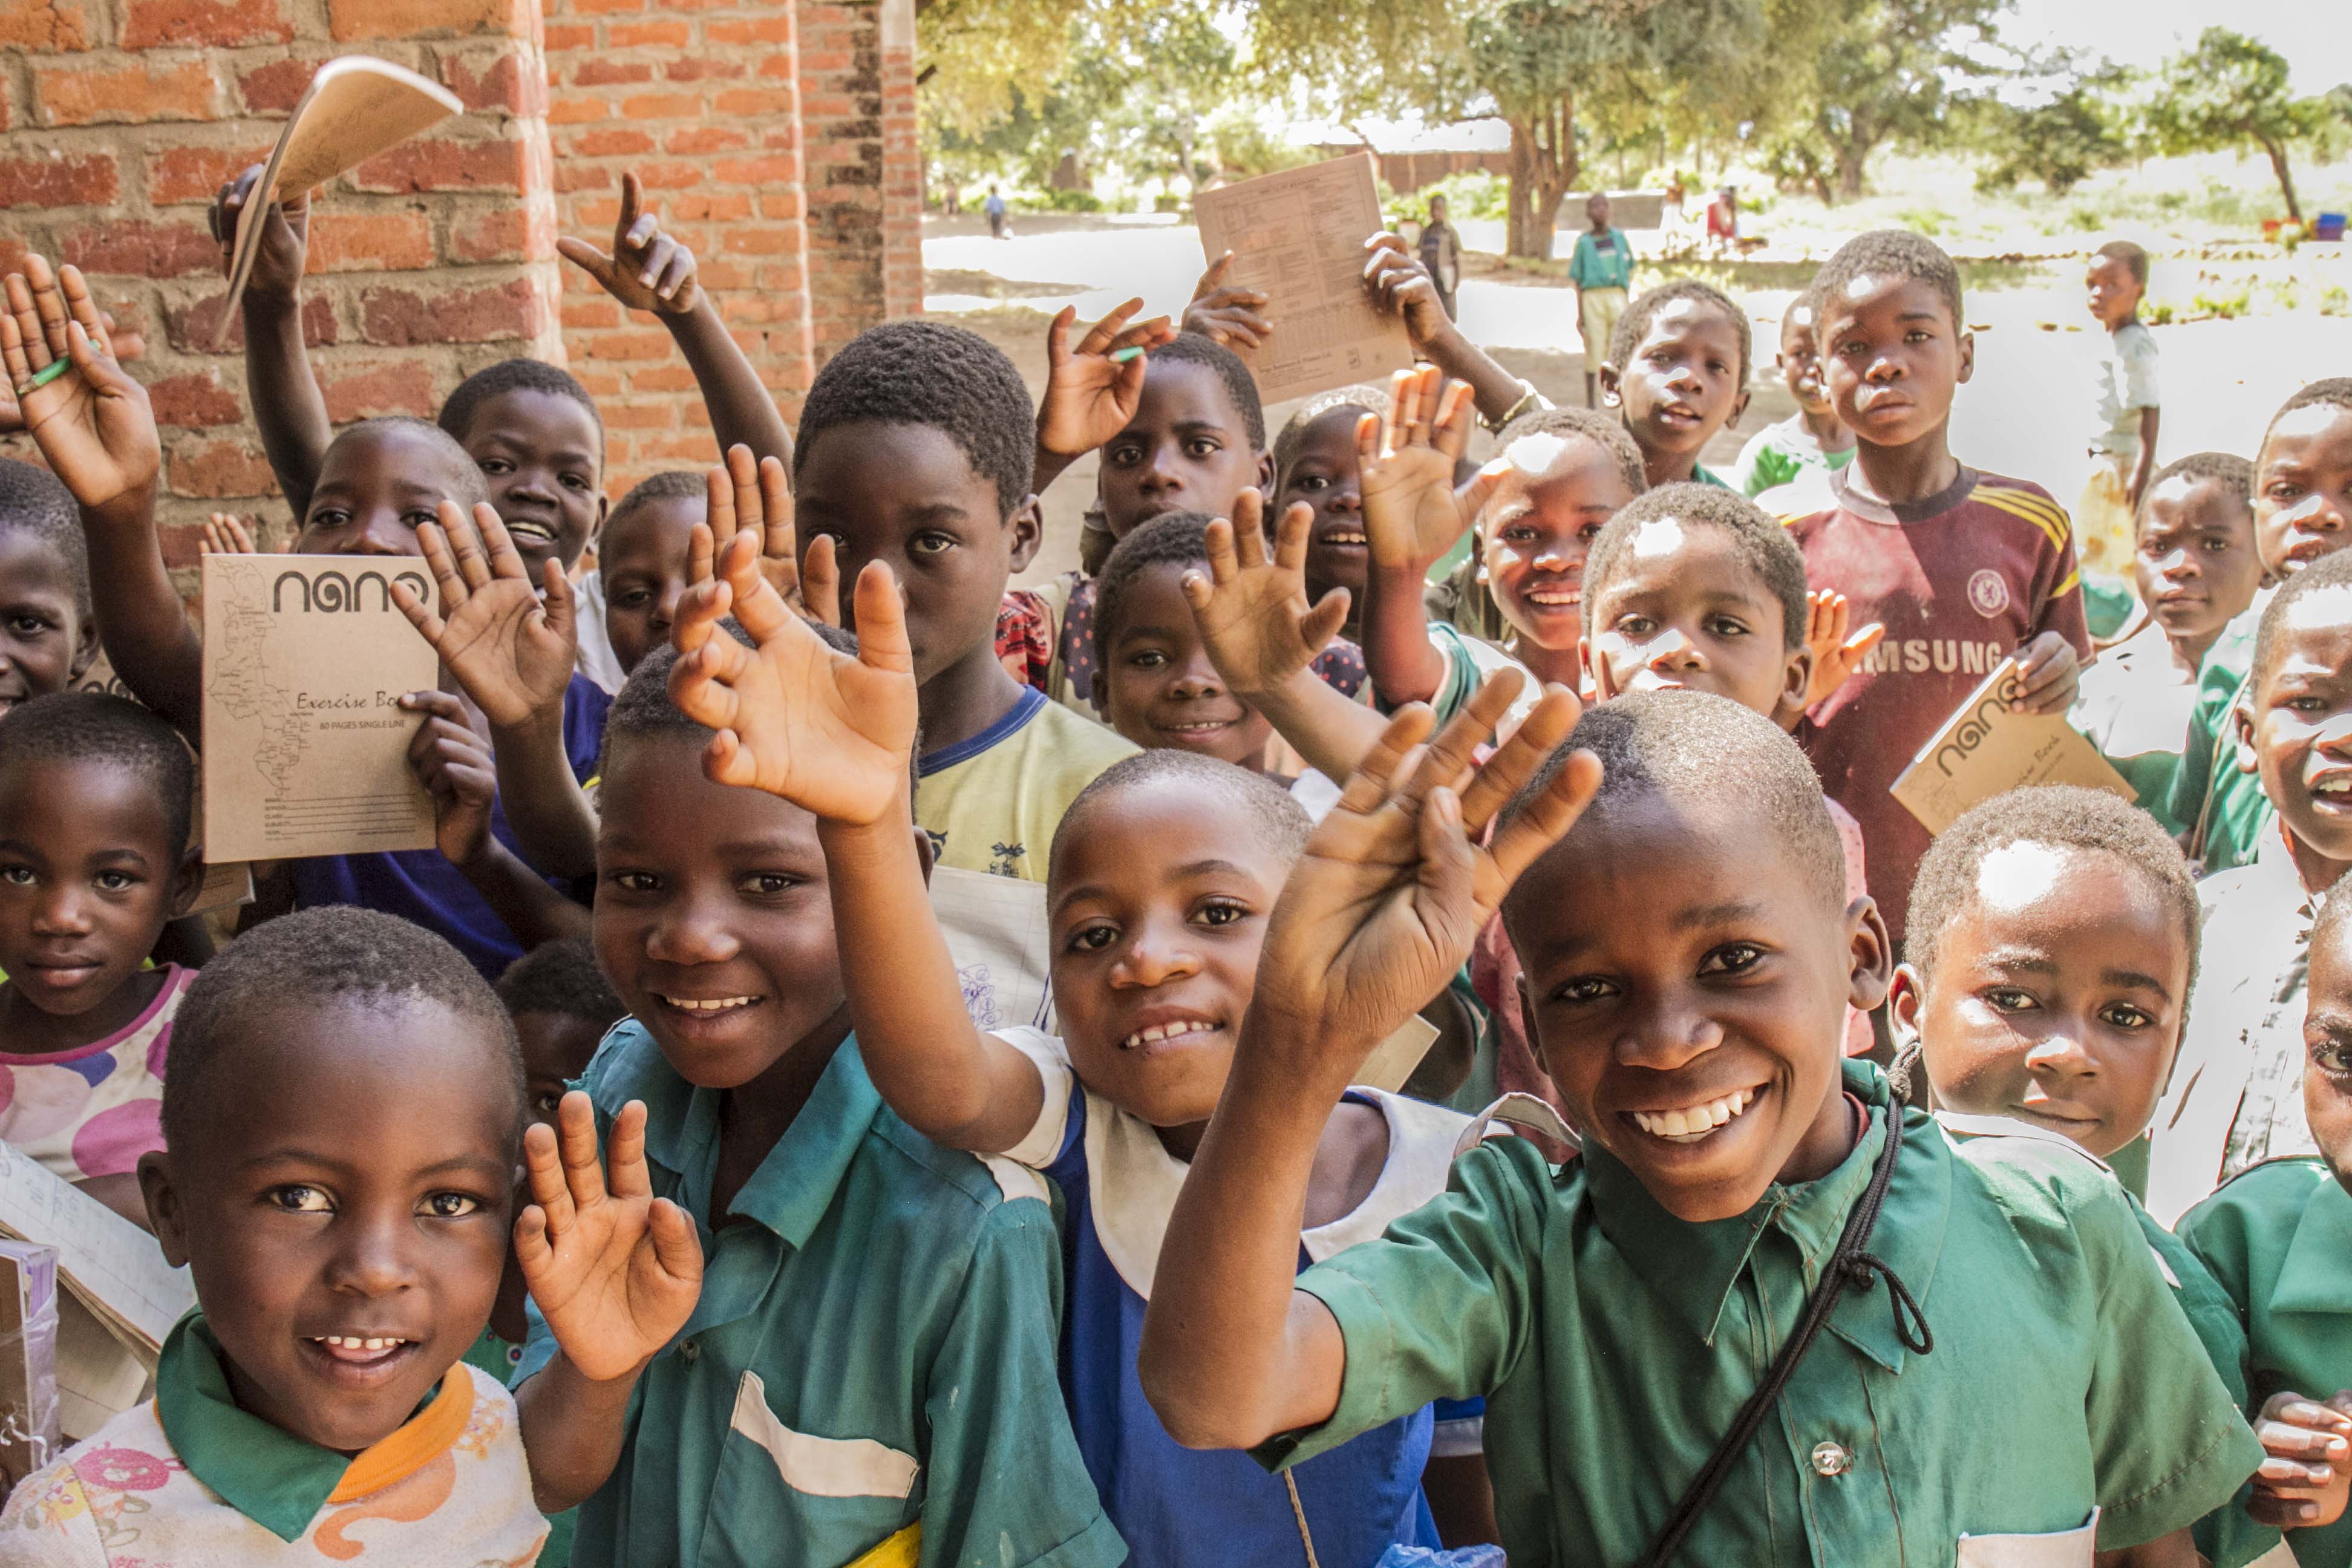 Receiving a notebook is not an everyday luxury.   The Malawian government cannot adequately supply learning resources to all children of the school.  These are children of Standard One, where 1 teacher is responsible for the 169 children enrolled. 